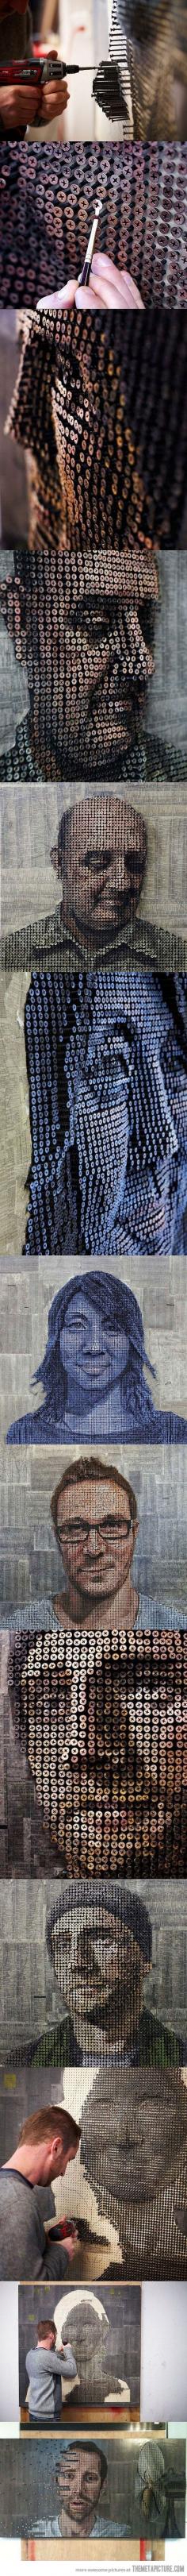 
                    
                        ♥ 3D portraits made from screws, by Andrew Myers. Hardware and art are a marriage made in heaven for me! Love the combo.
                    
                